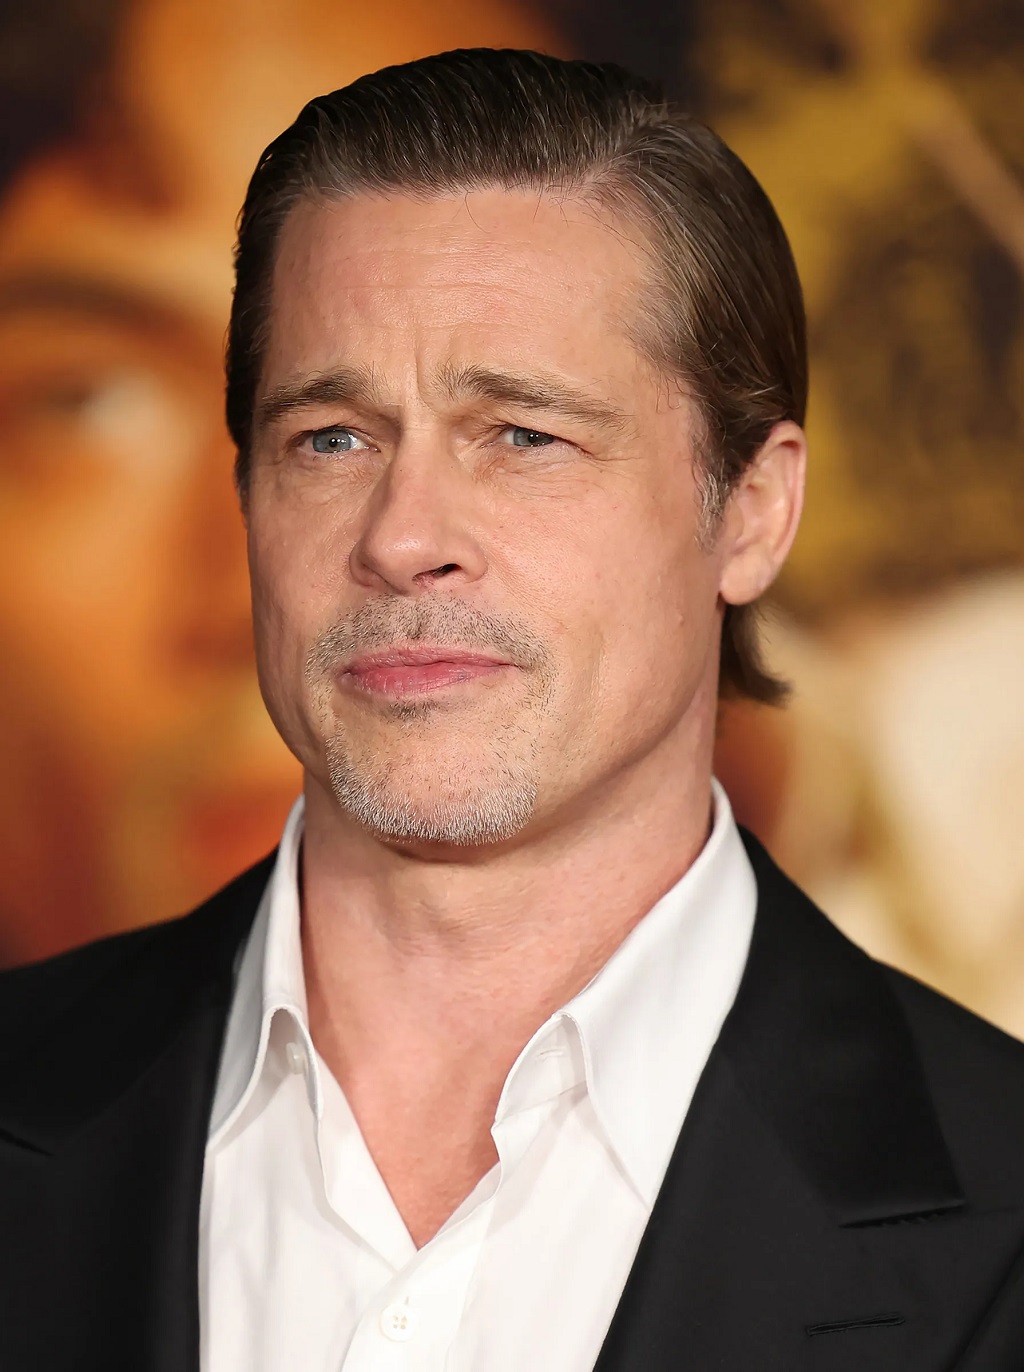 Life Lessons from Brad Pitt